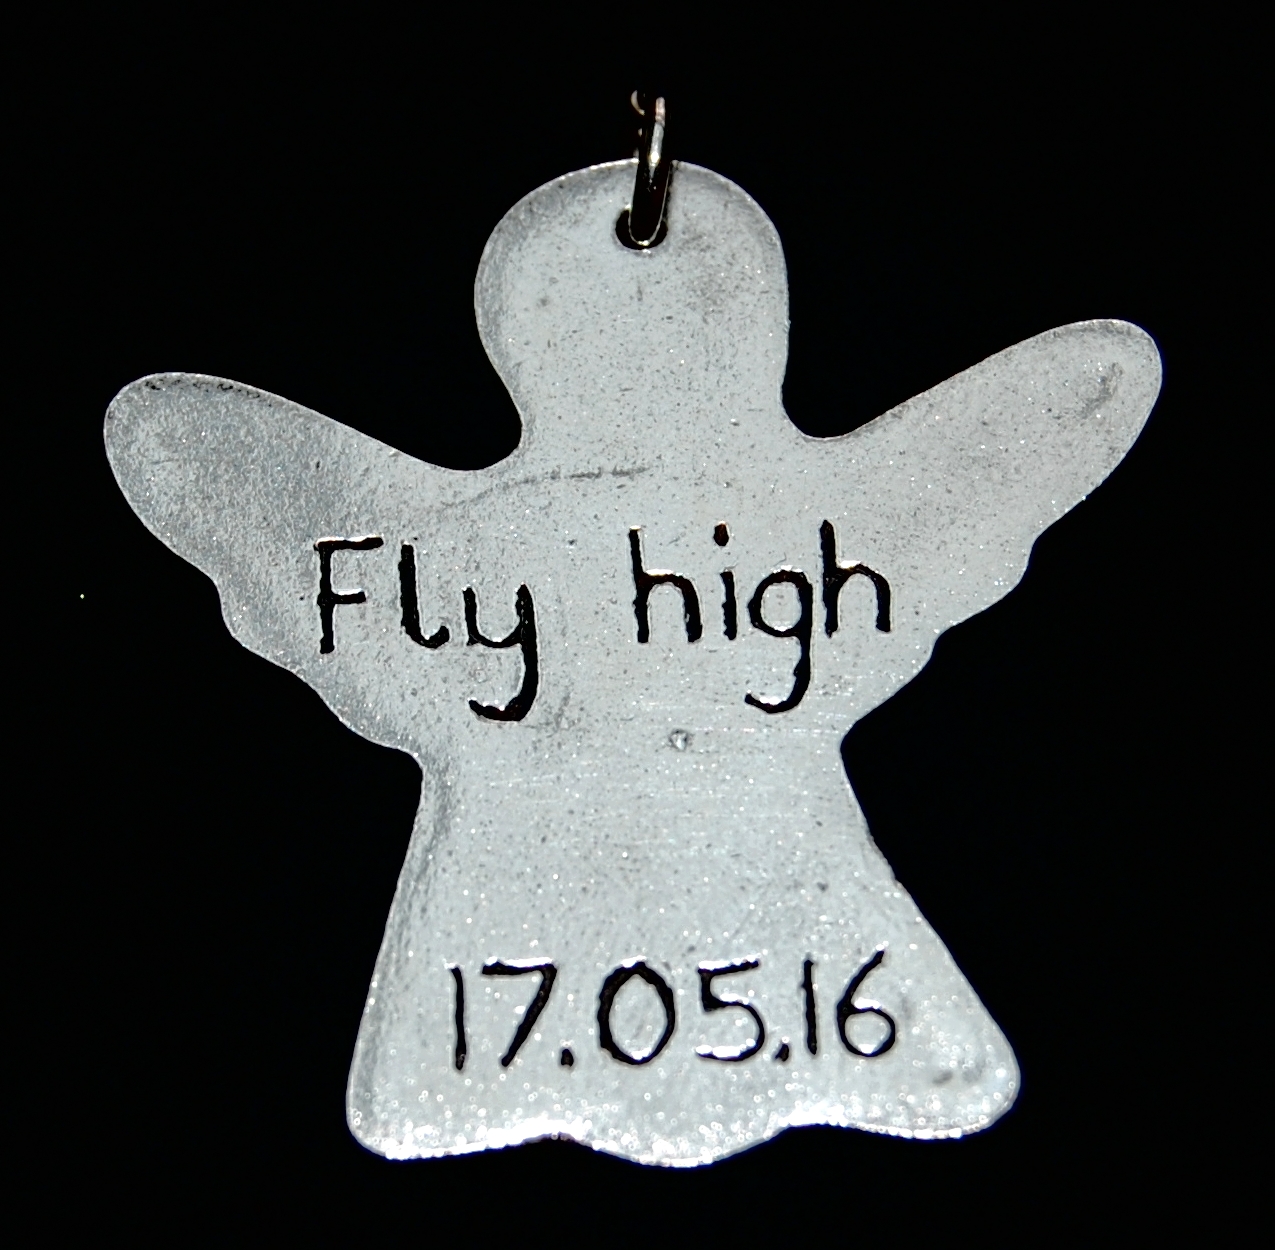 Inscription on the back of a silver angel footprint charm.